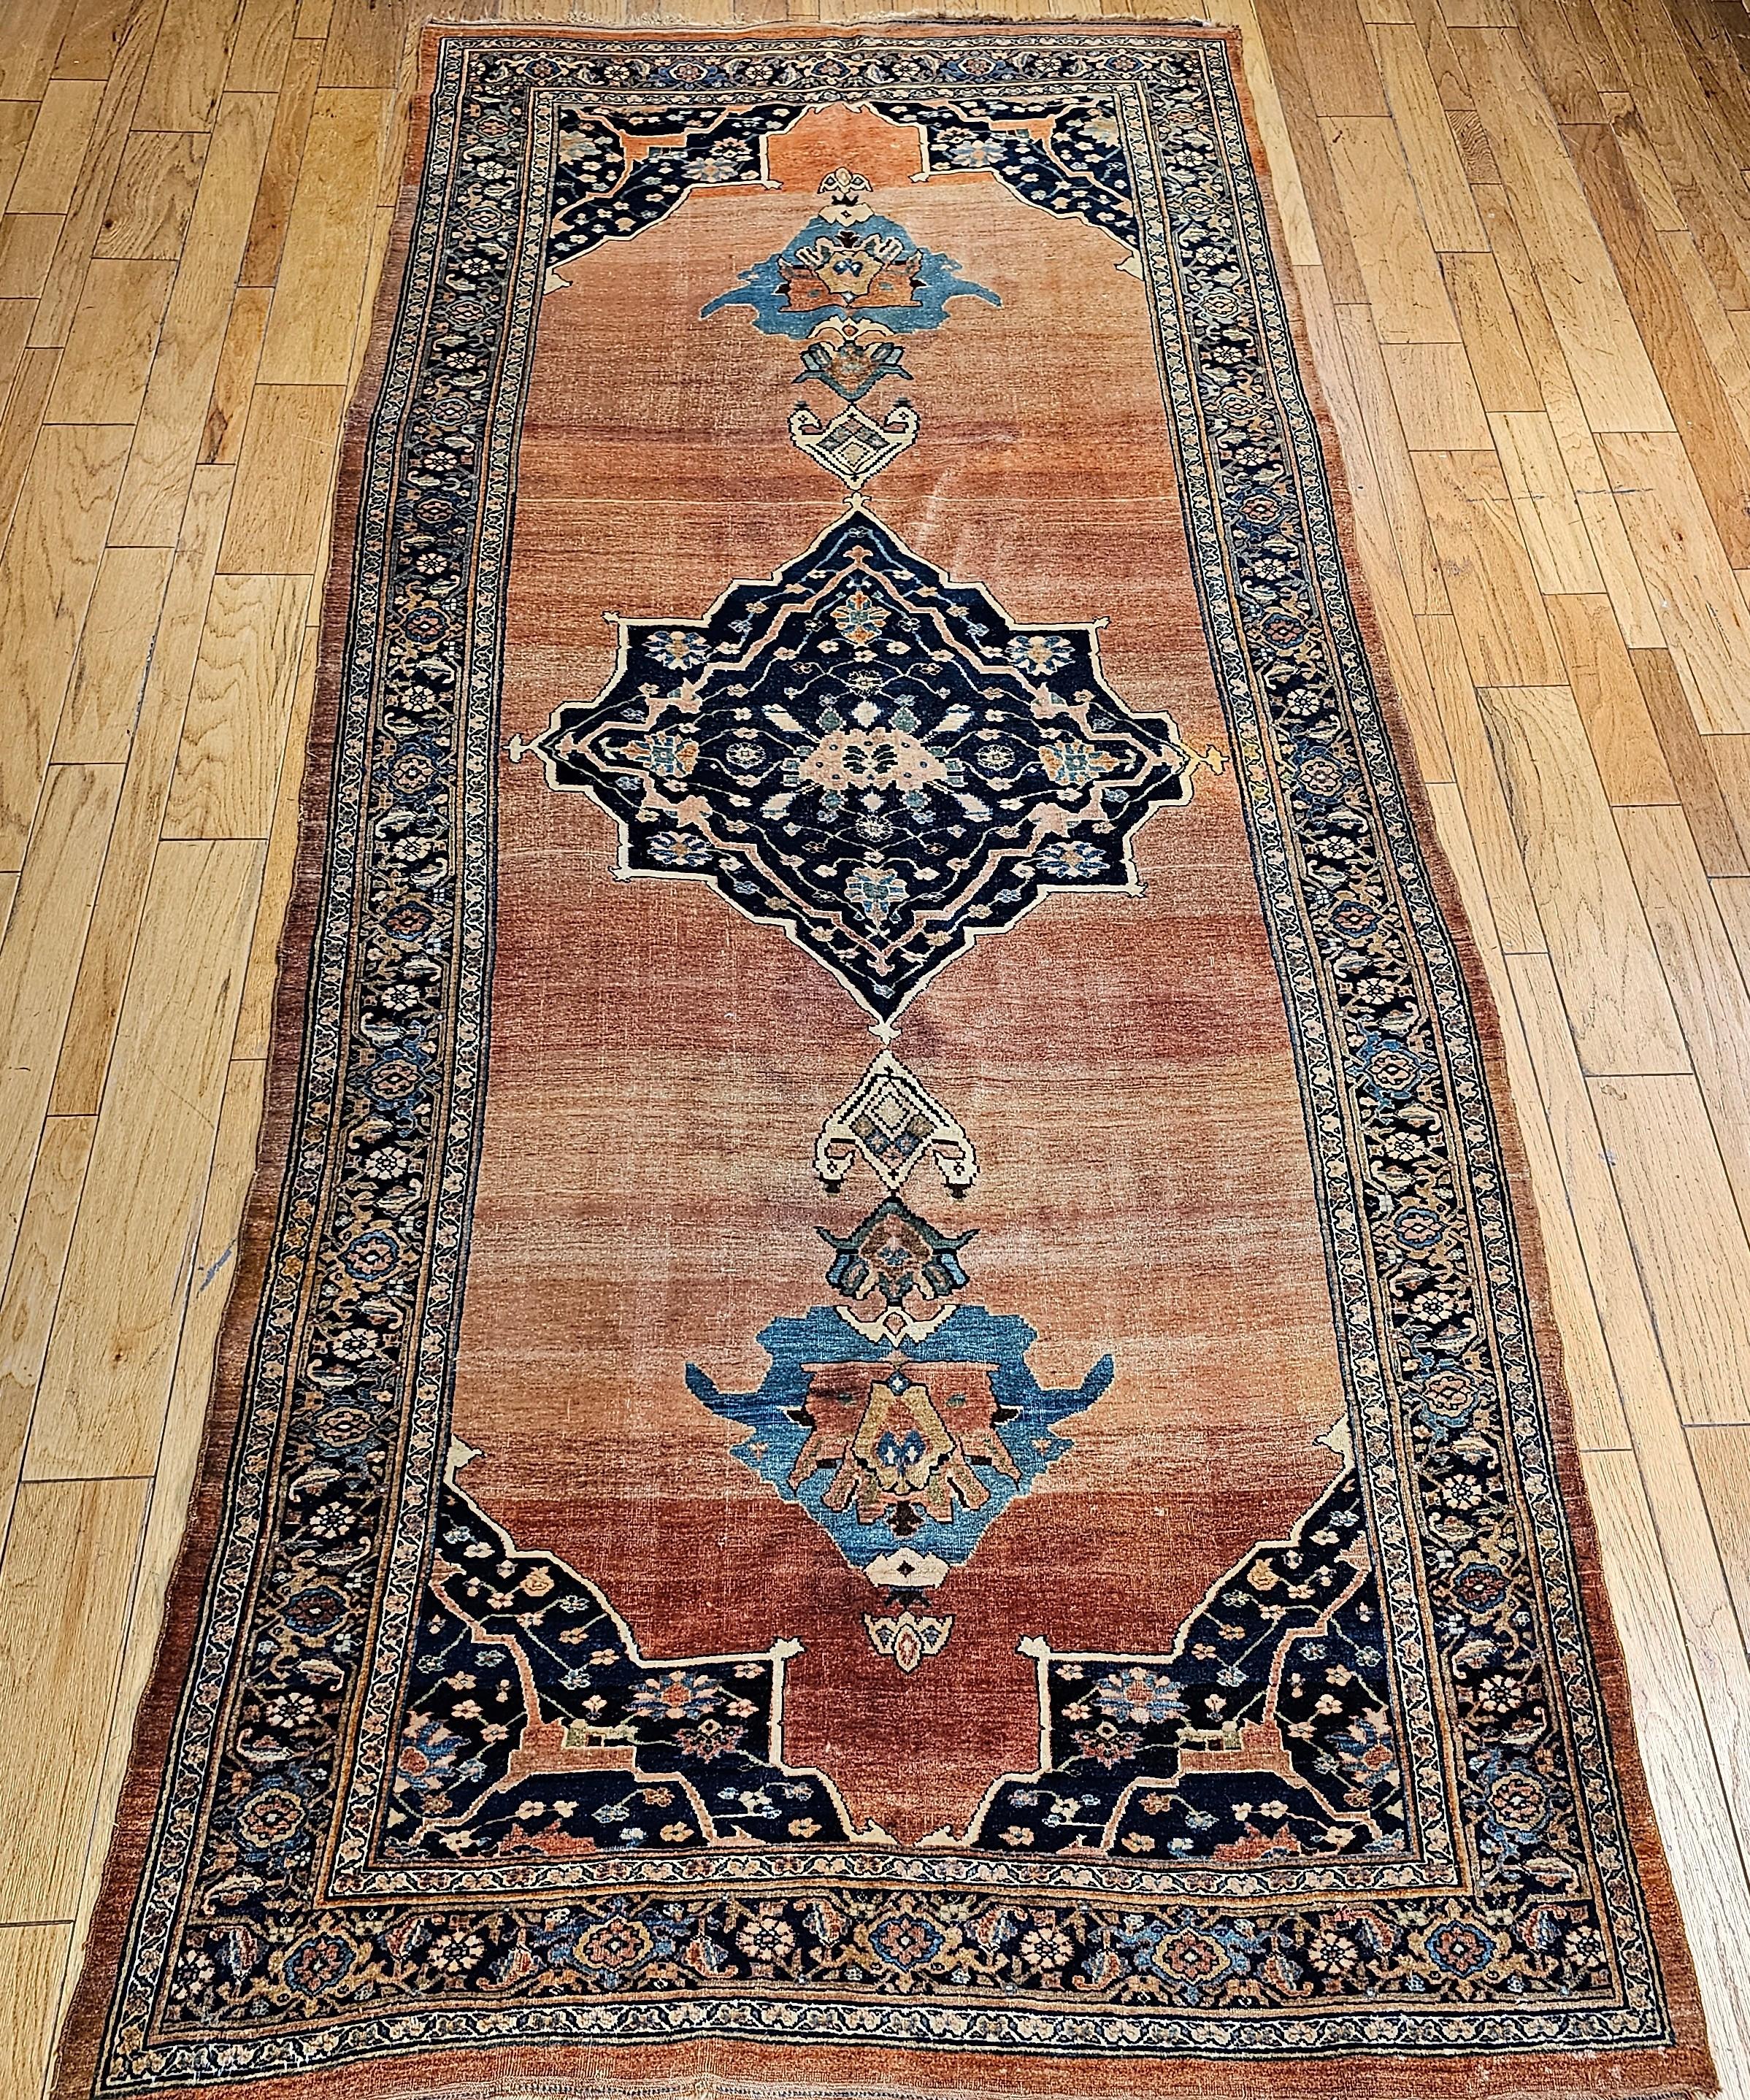 This Bidjar (Bijar) gallery (corridor) rug is a great example of the art of Persian rug weaving from the last quarter of the 1800s. The Bidjar (Bijar) rug is a very unique and extremely desirable abrash rust color open field design. The border is in